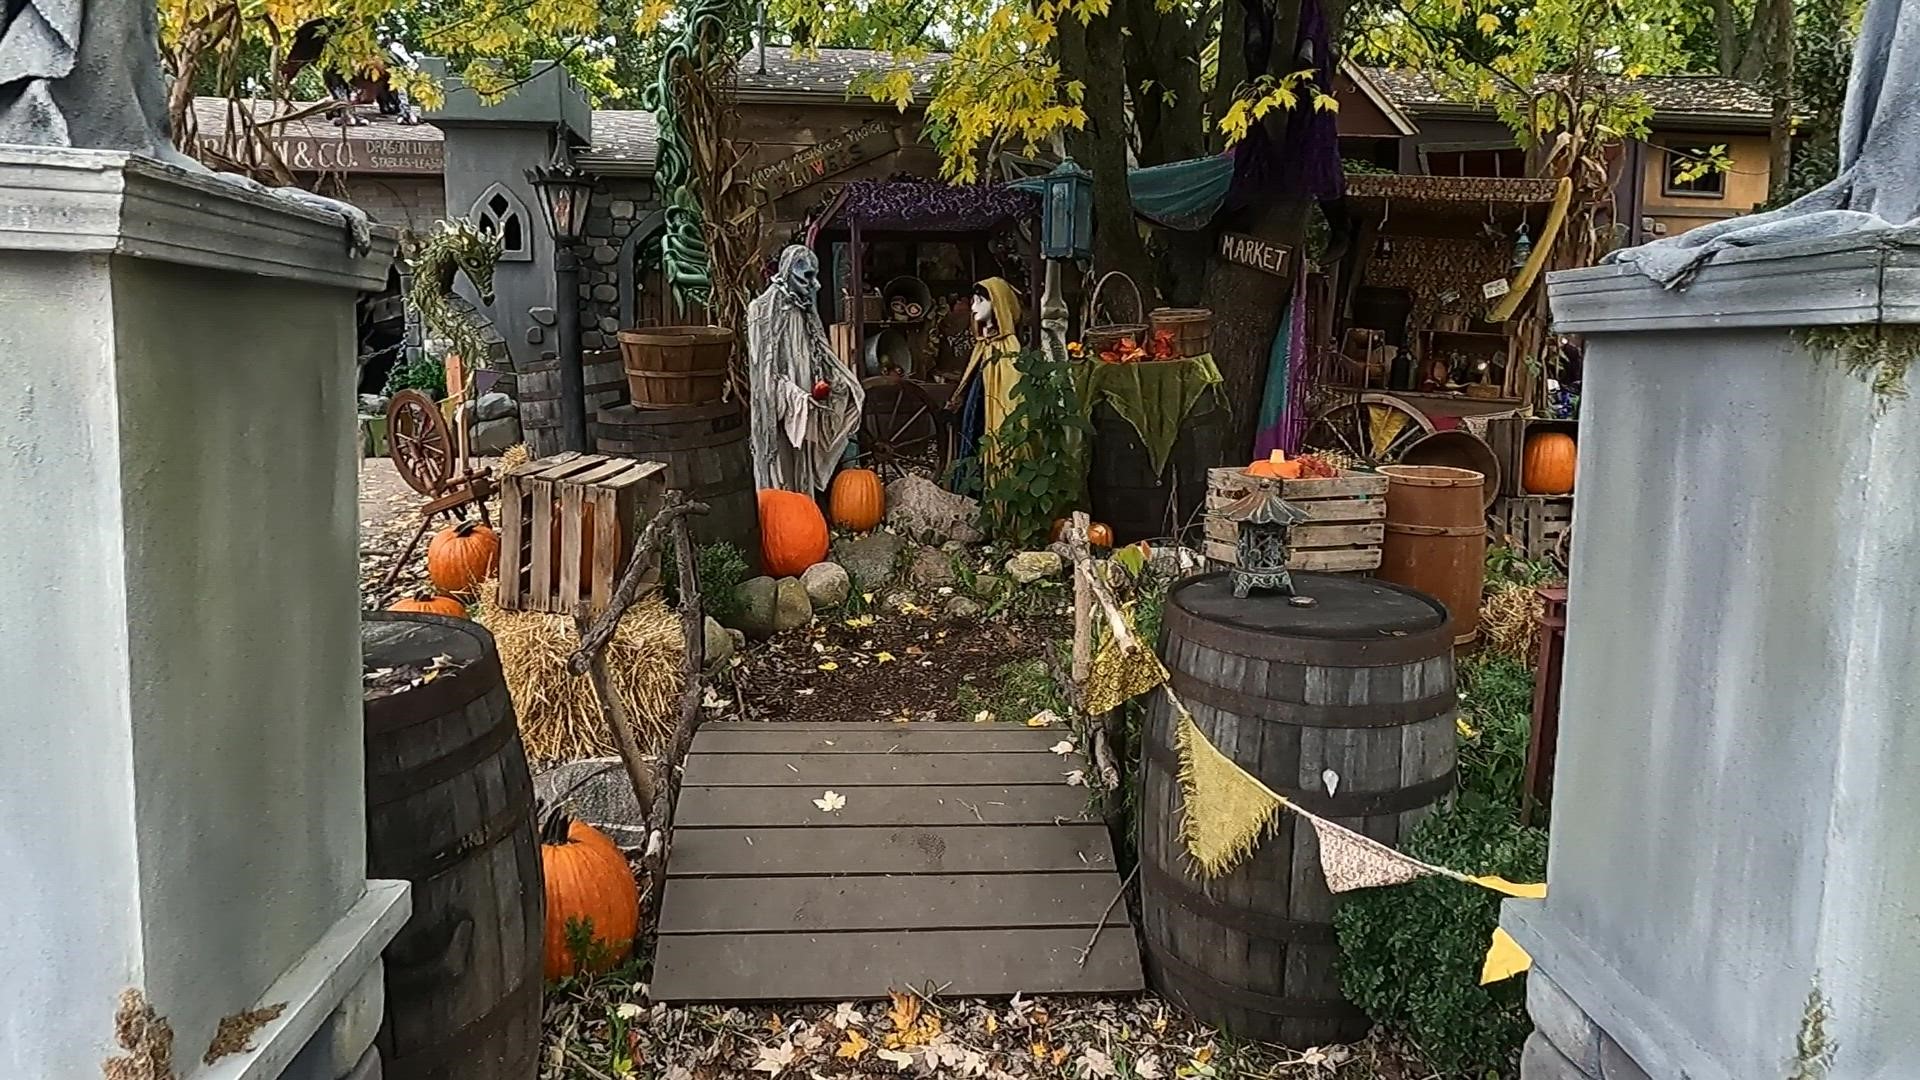 Jennifer Dunahee lives in Comstock Park, and for the 13th year in a row, she's transformed her yard into an interactive Halloween display.